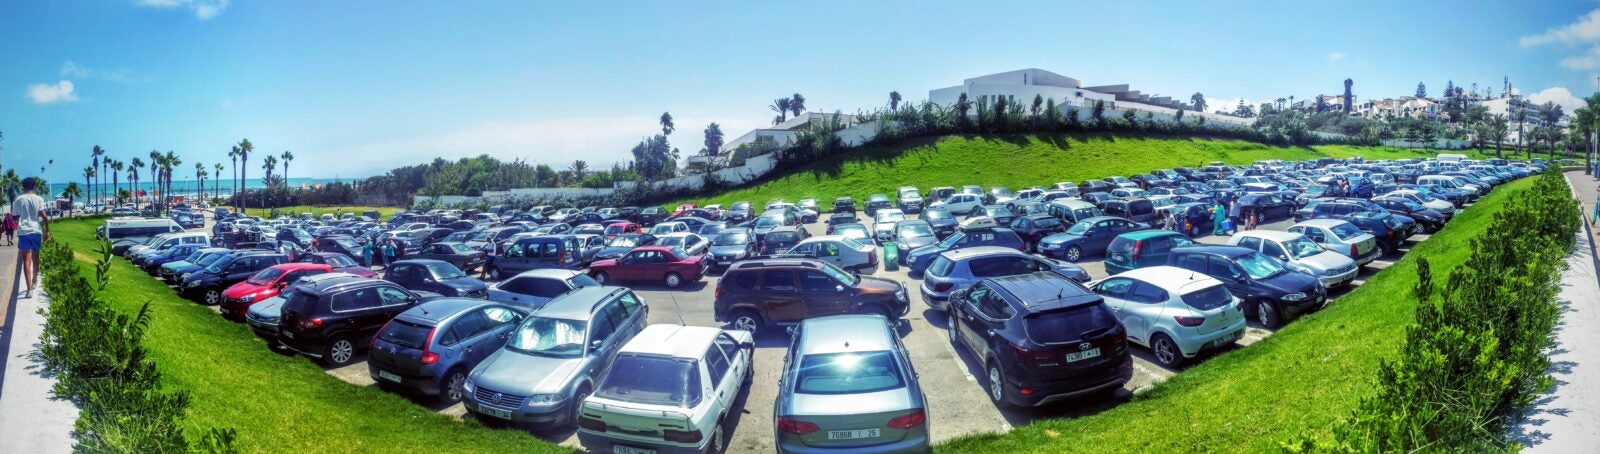 Panoramic view of long stretches of parked cars.